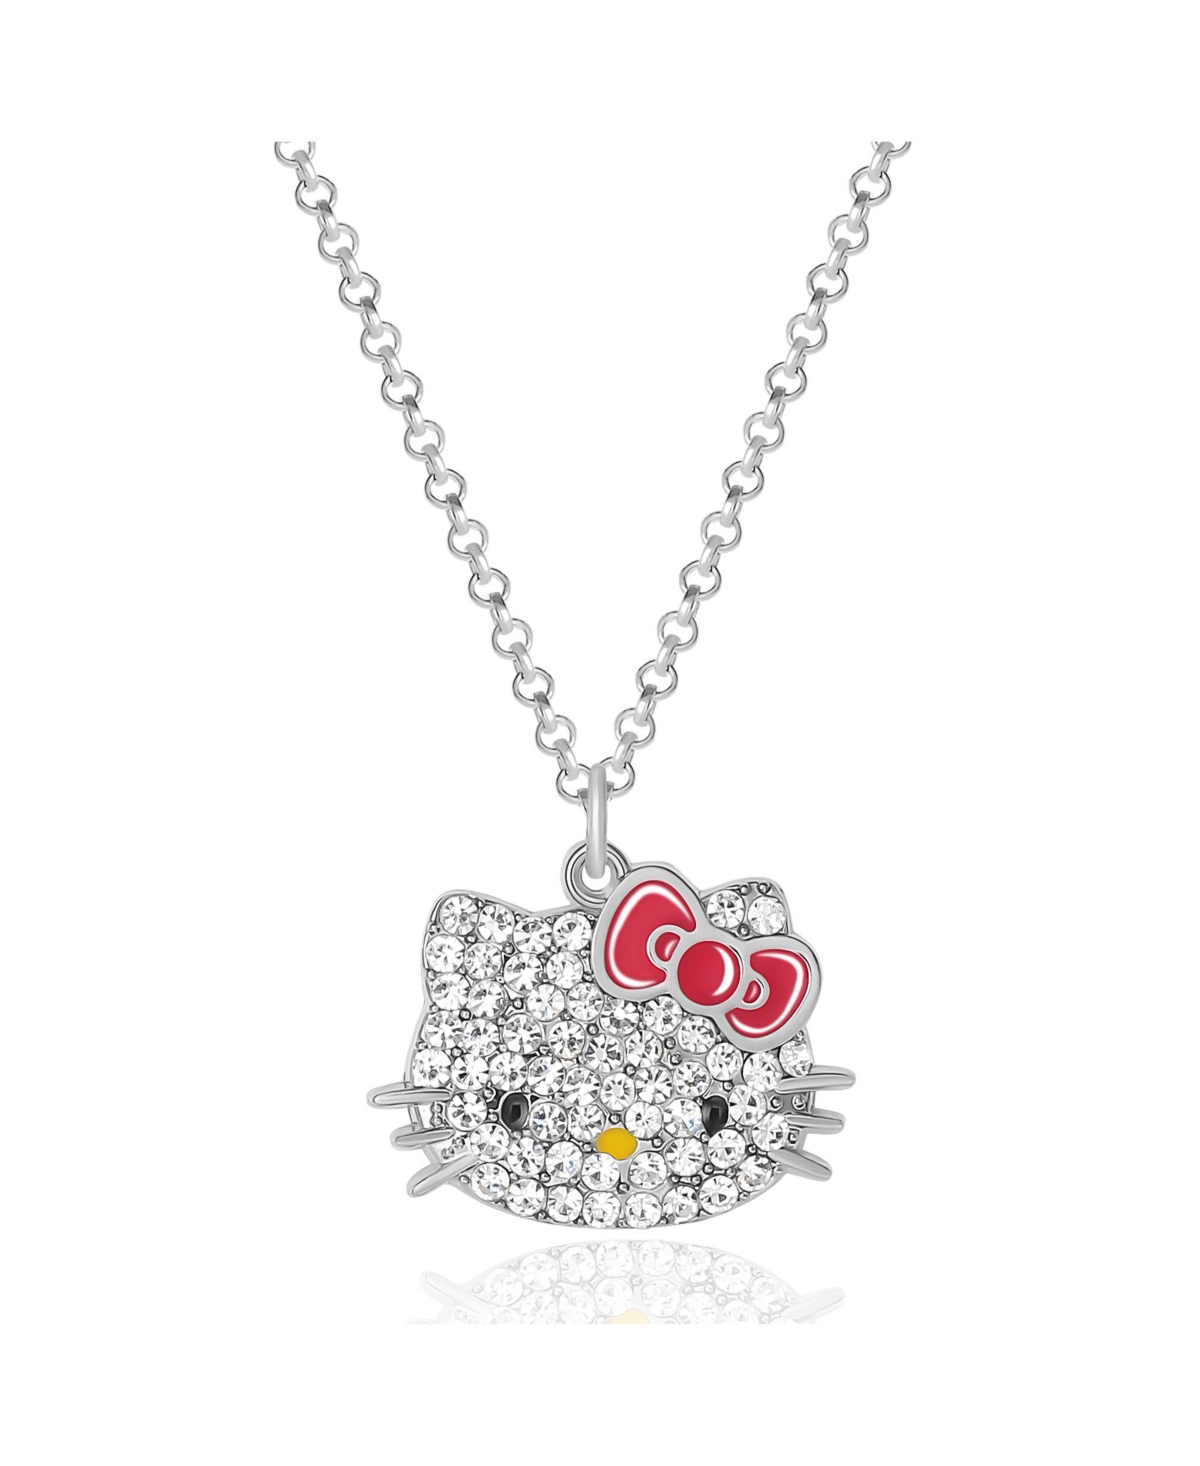 Sanrio Hello Kitty Fashion Pave Crystal Necklace - Silver tone pink